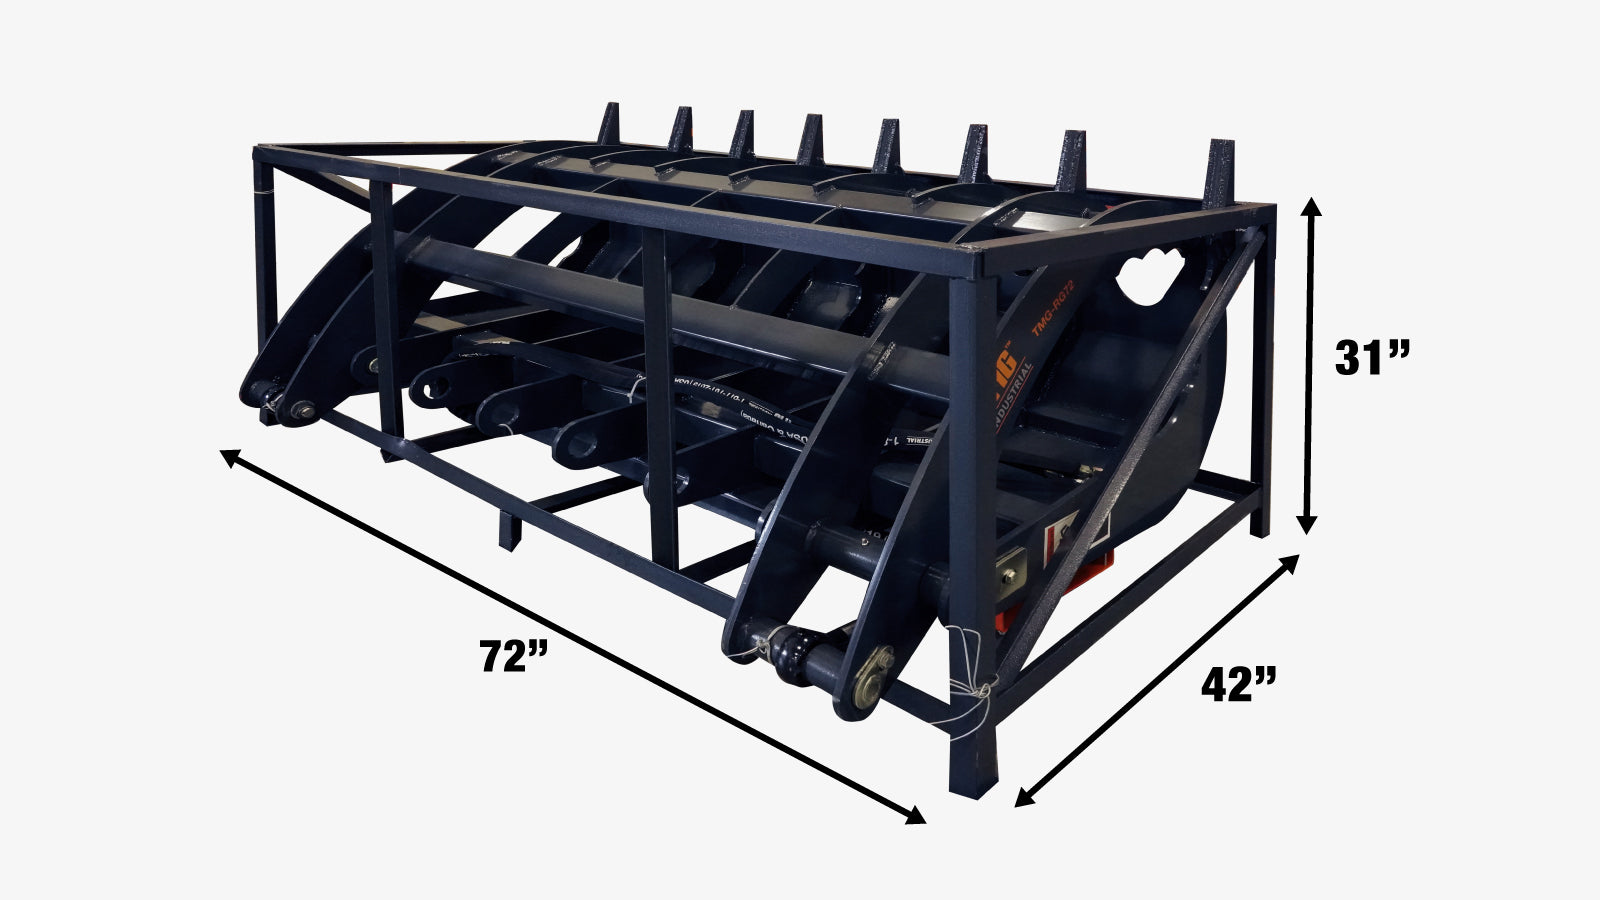 TMG Industrial 72” Skid Steer Root Rake Grapple Attachment, Universal Mount, 53” Jaw Opening, 9” Tine Spacing, 3000 lb Weight Capacity, TMG-RG72-shipping-info-image